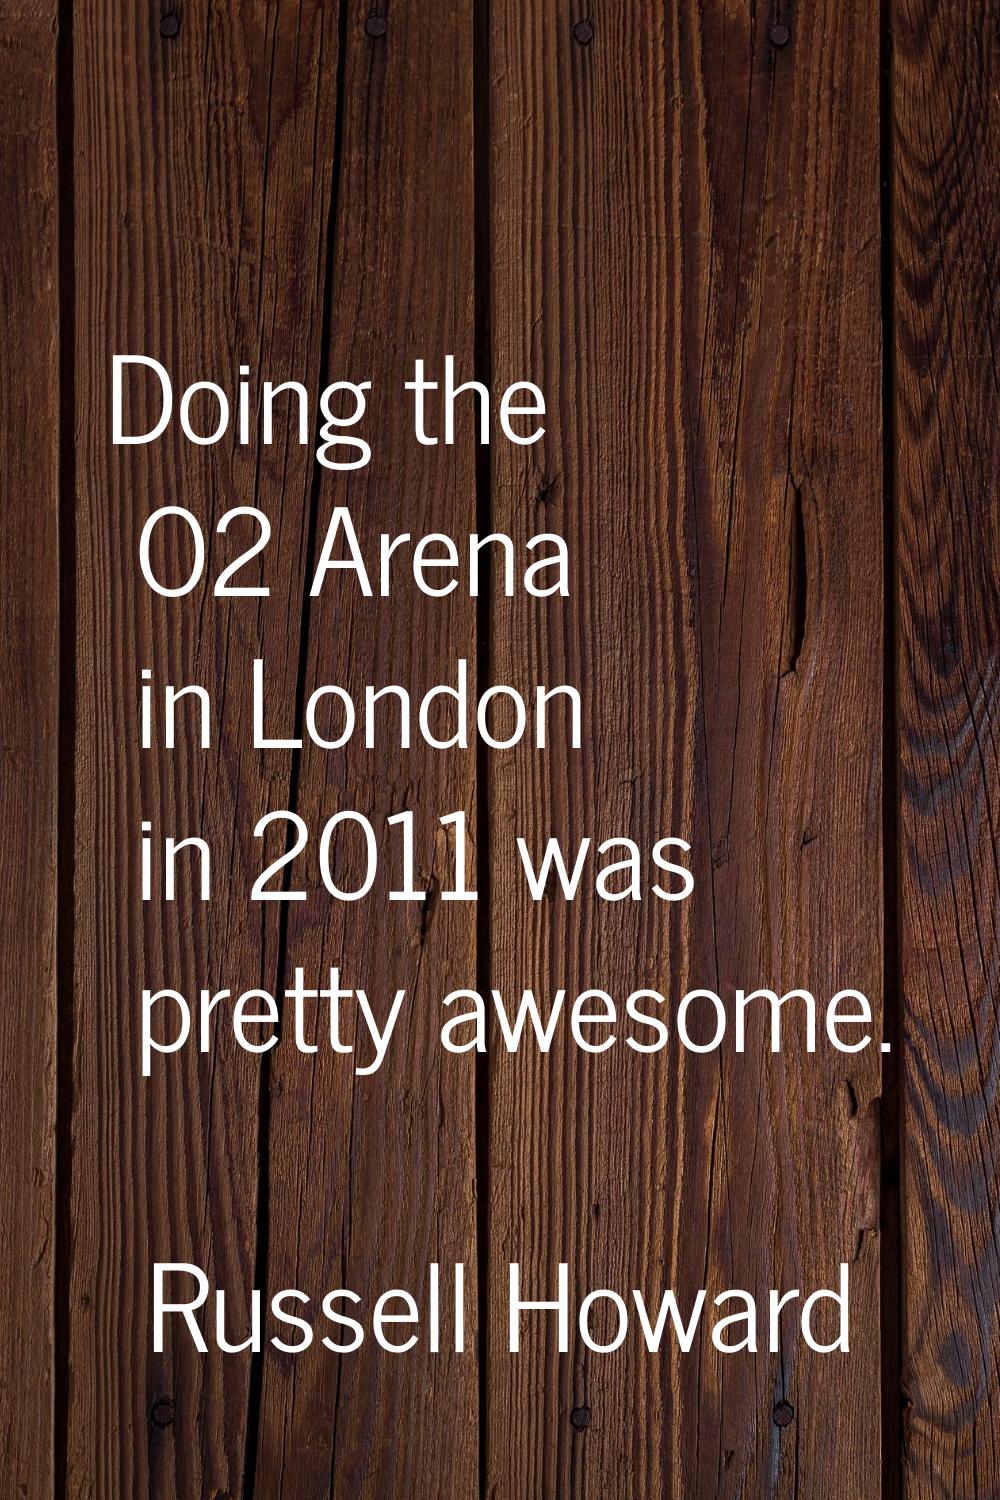 Doing the O2 Arena in London in 2011 was pretty awesome.